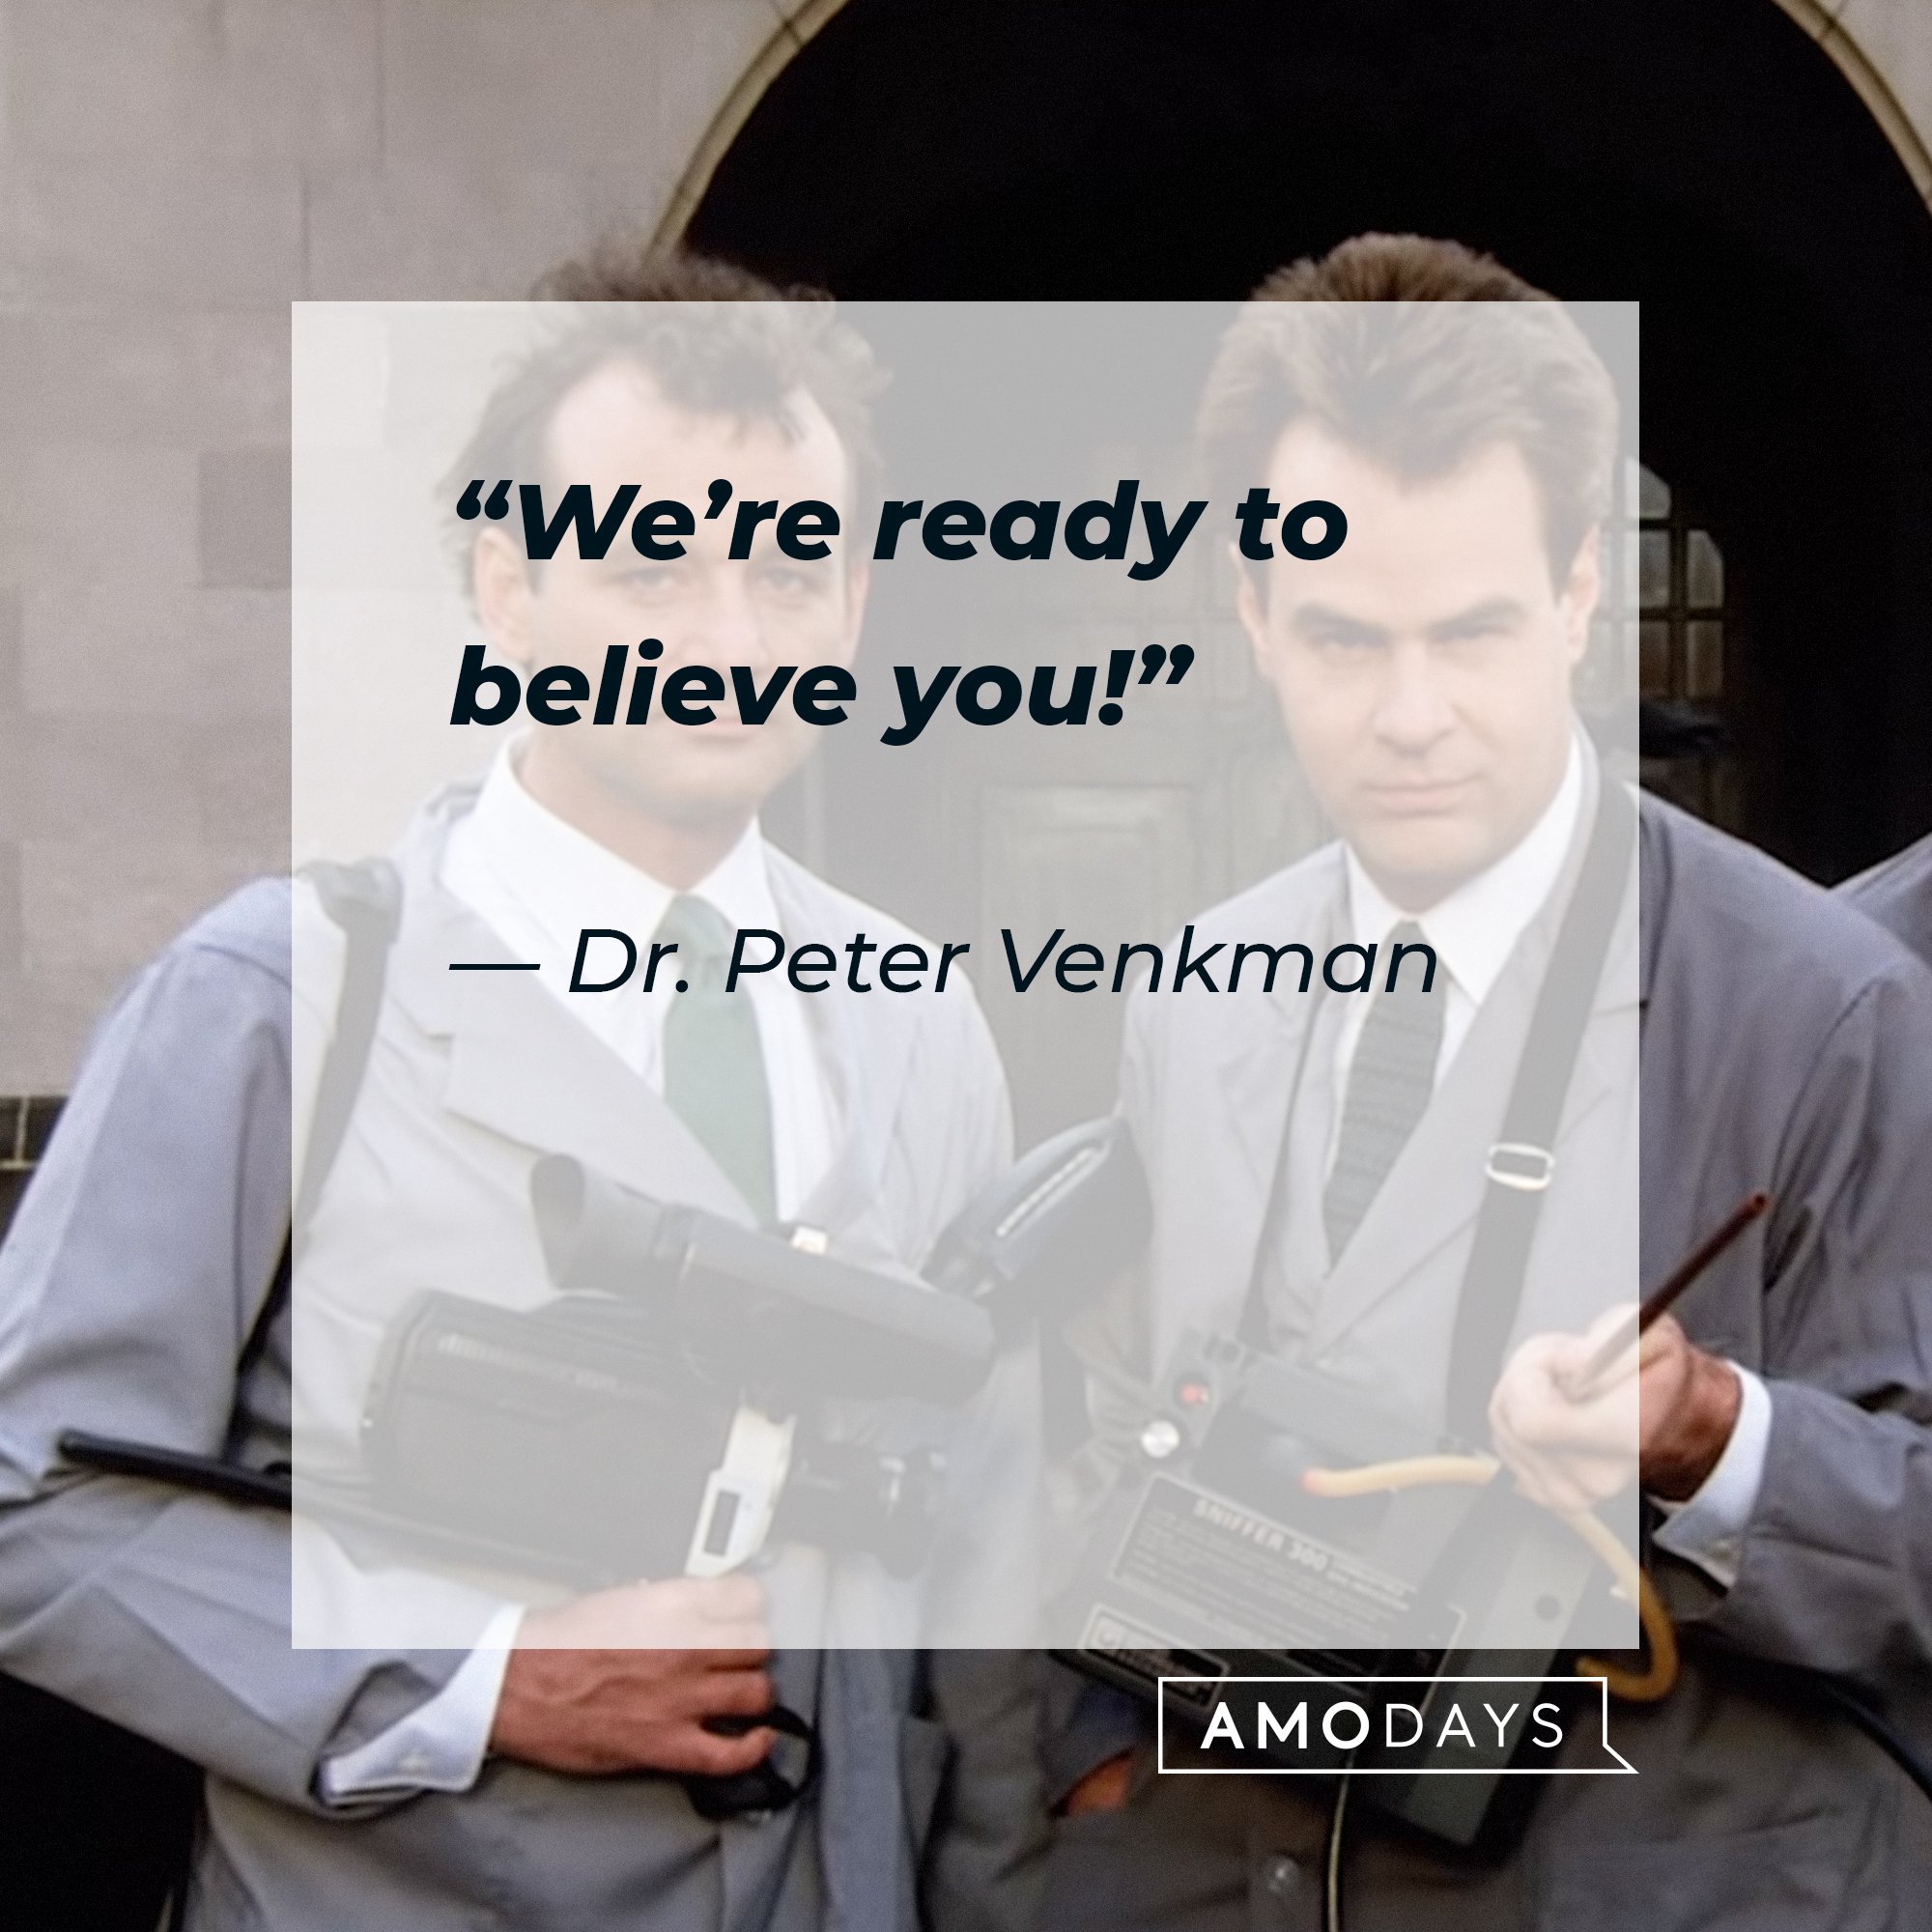 Dr. Peter Venkman's quote: “We’re ready to believe you!” | Image: AmoDays